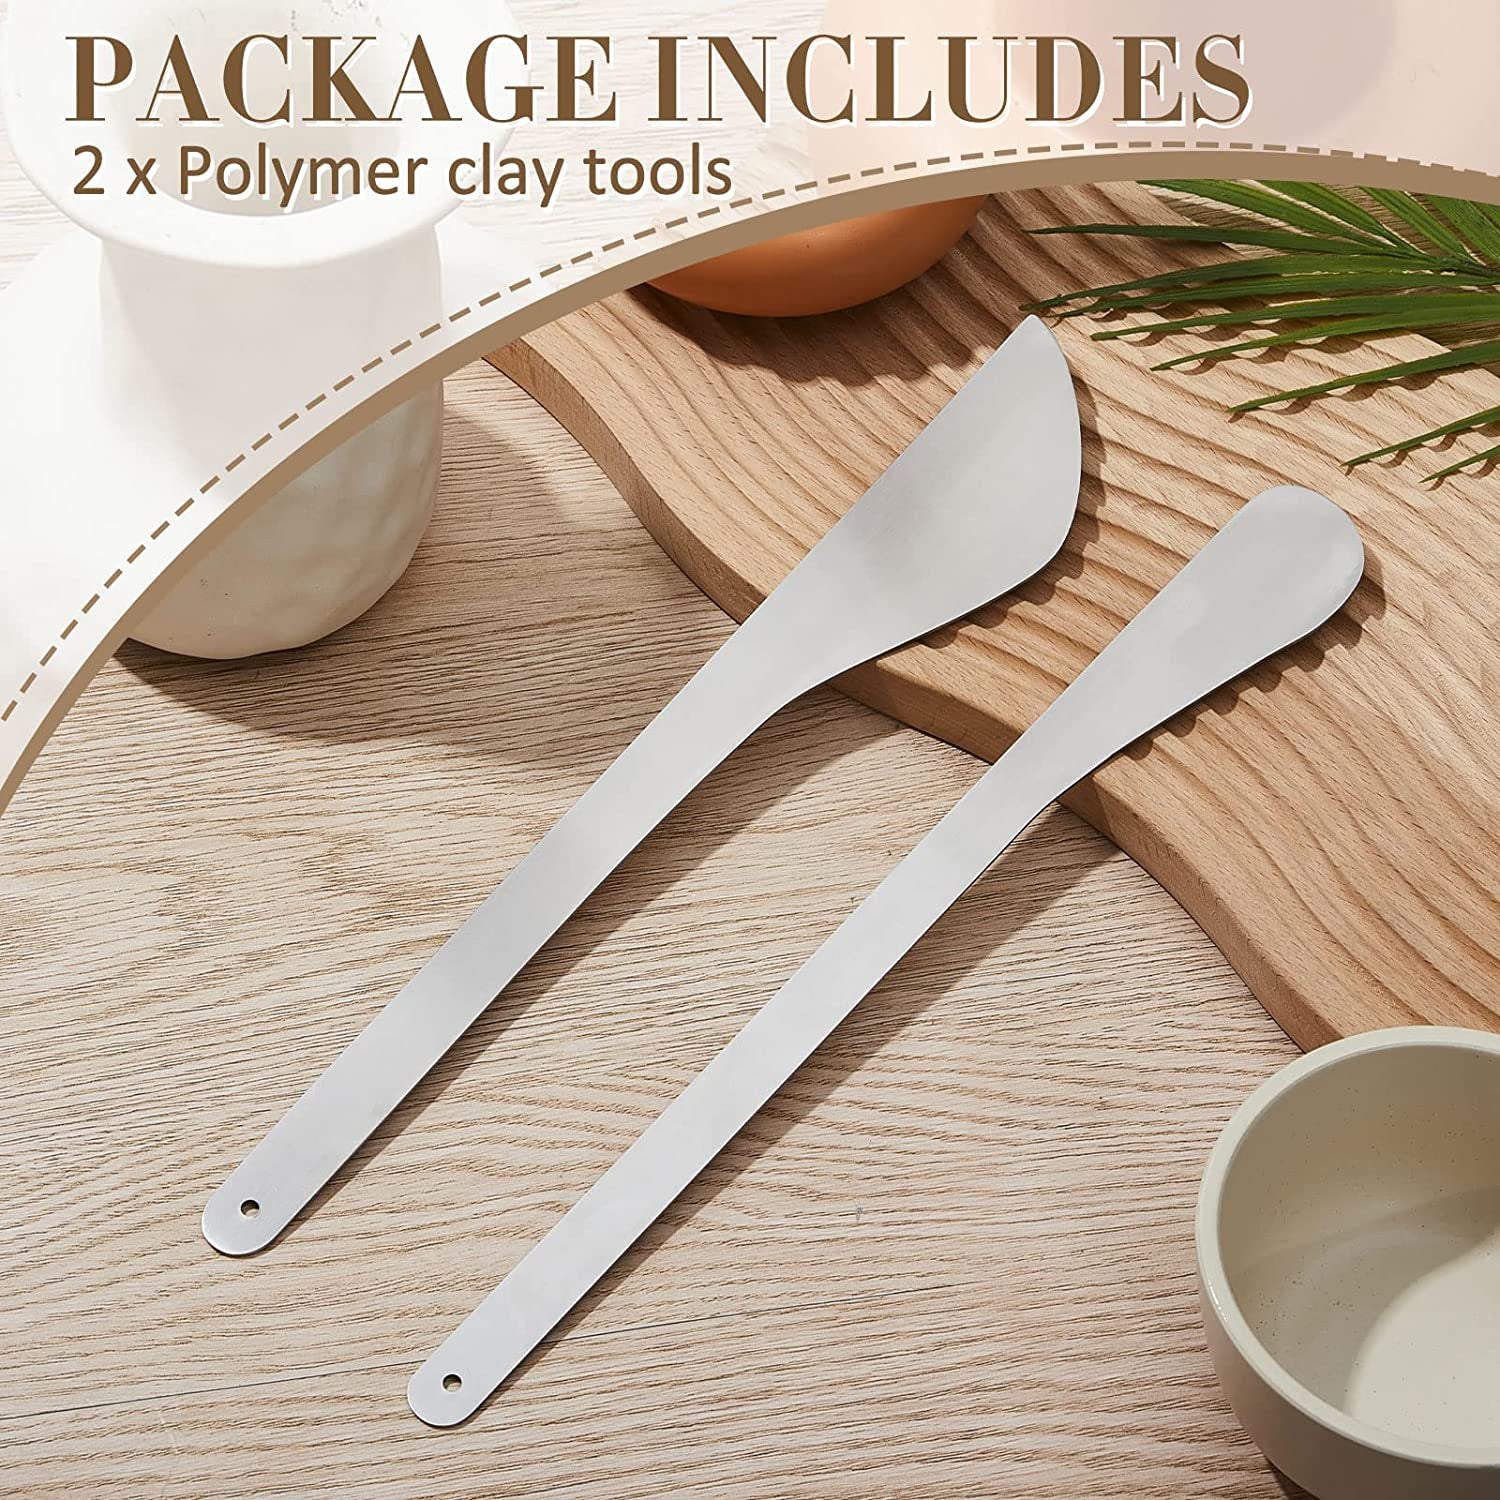 Stainless Steel Pottery Tools Clay Tools 2 Pieces Modeling Sculpture Tools Modeling Pottery Tools Polymer Clay Tools Pottery Bats for Throwing Pottery Supplies for Cutting Carving and Smoothing